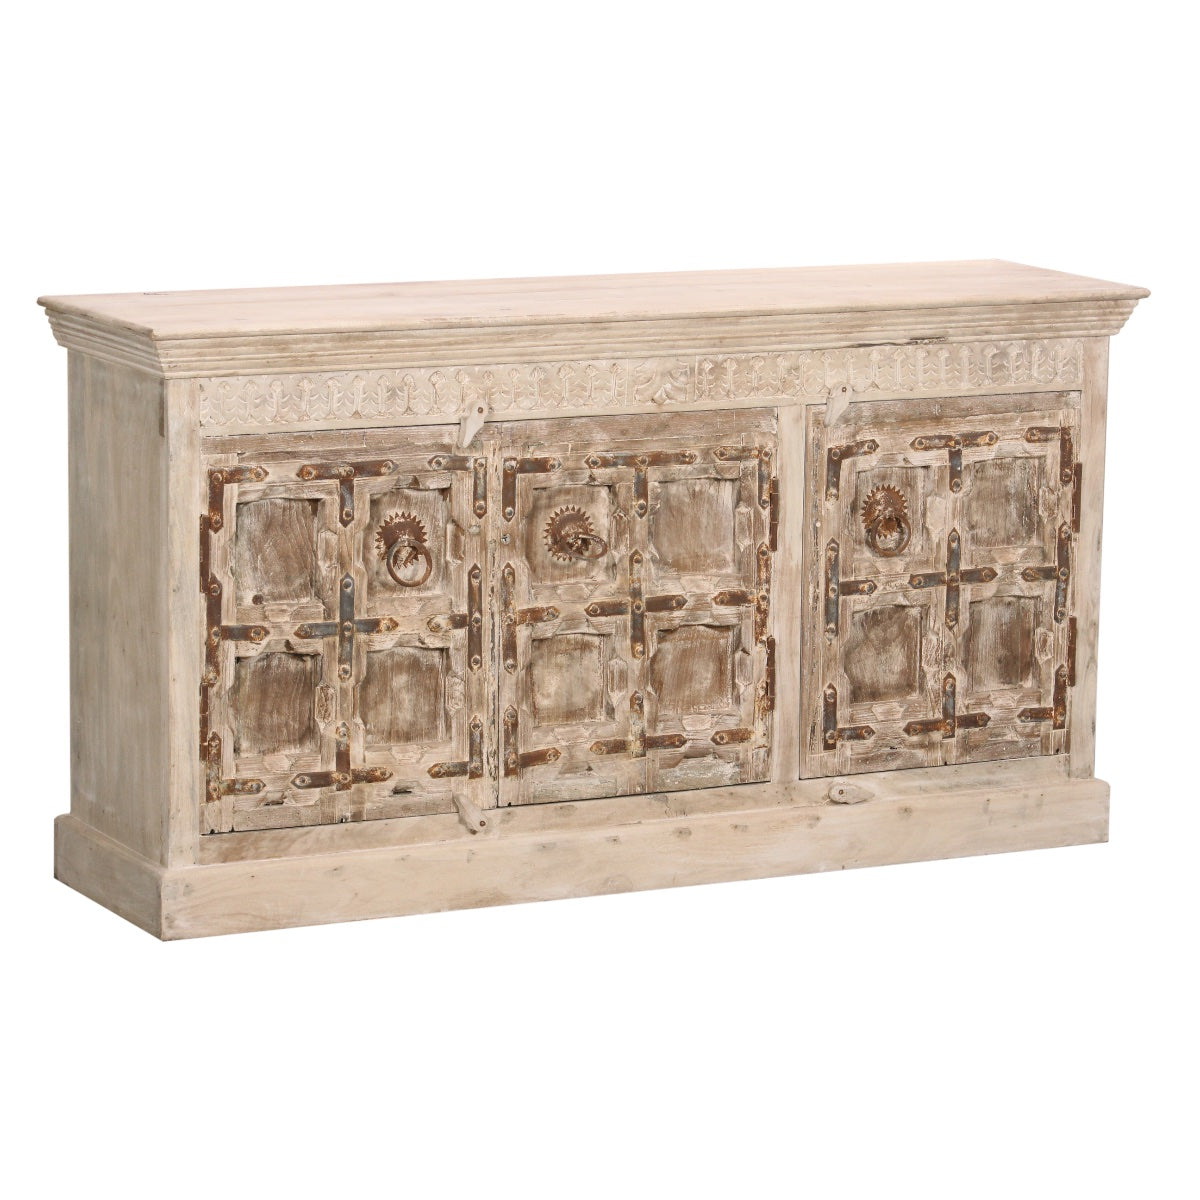 Indian Acid Wash Timber 180x40x80cm Sideboard | Assorted Designs